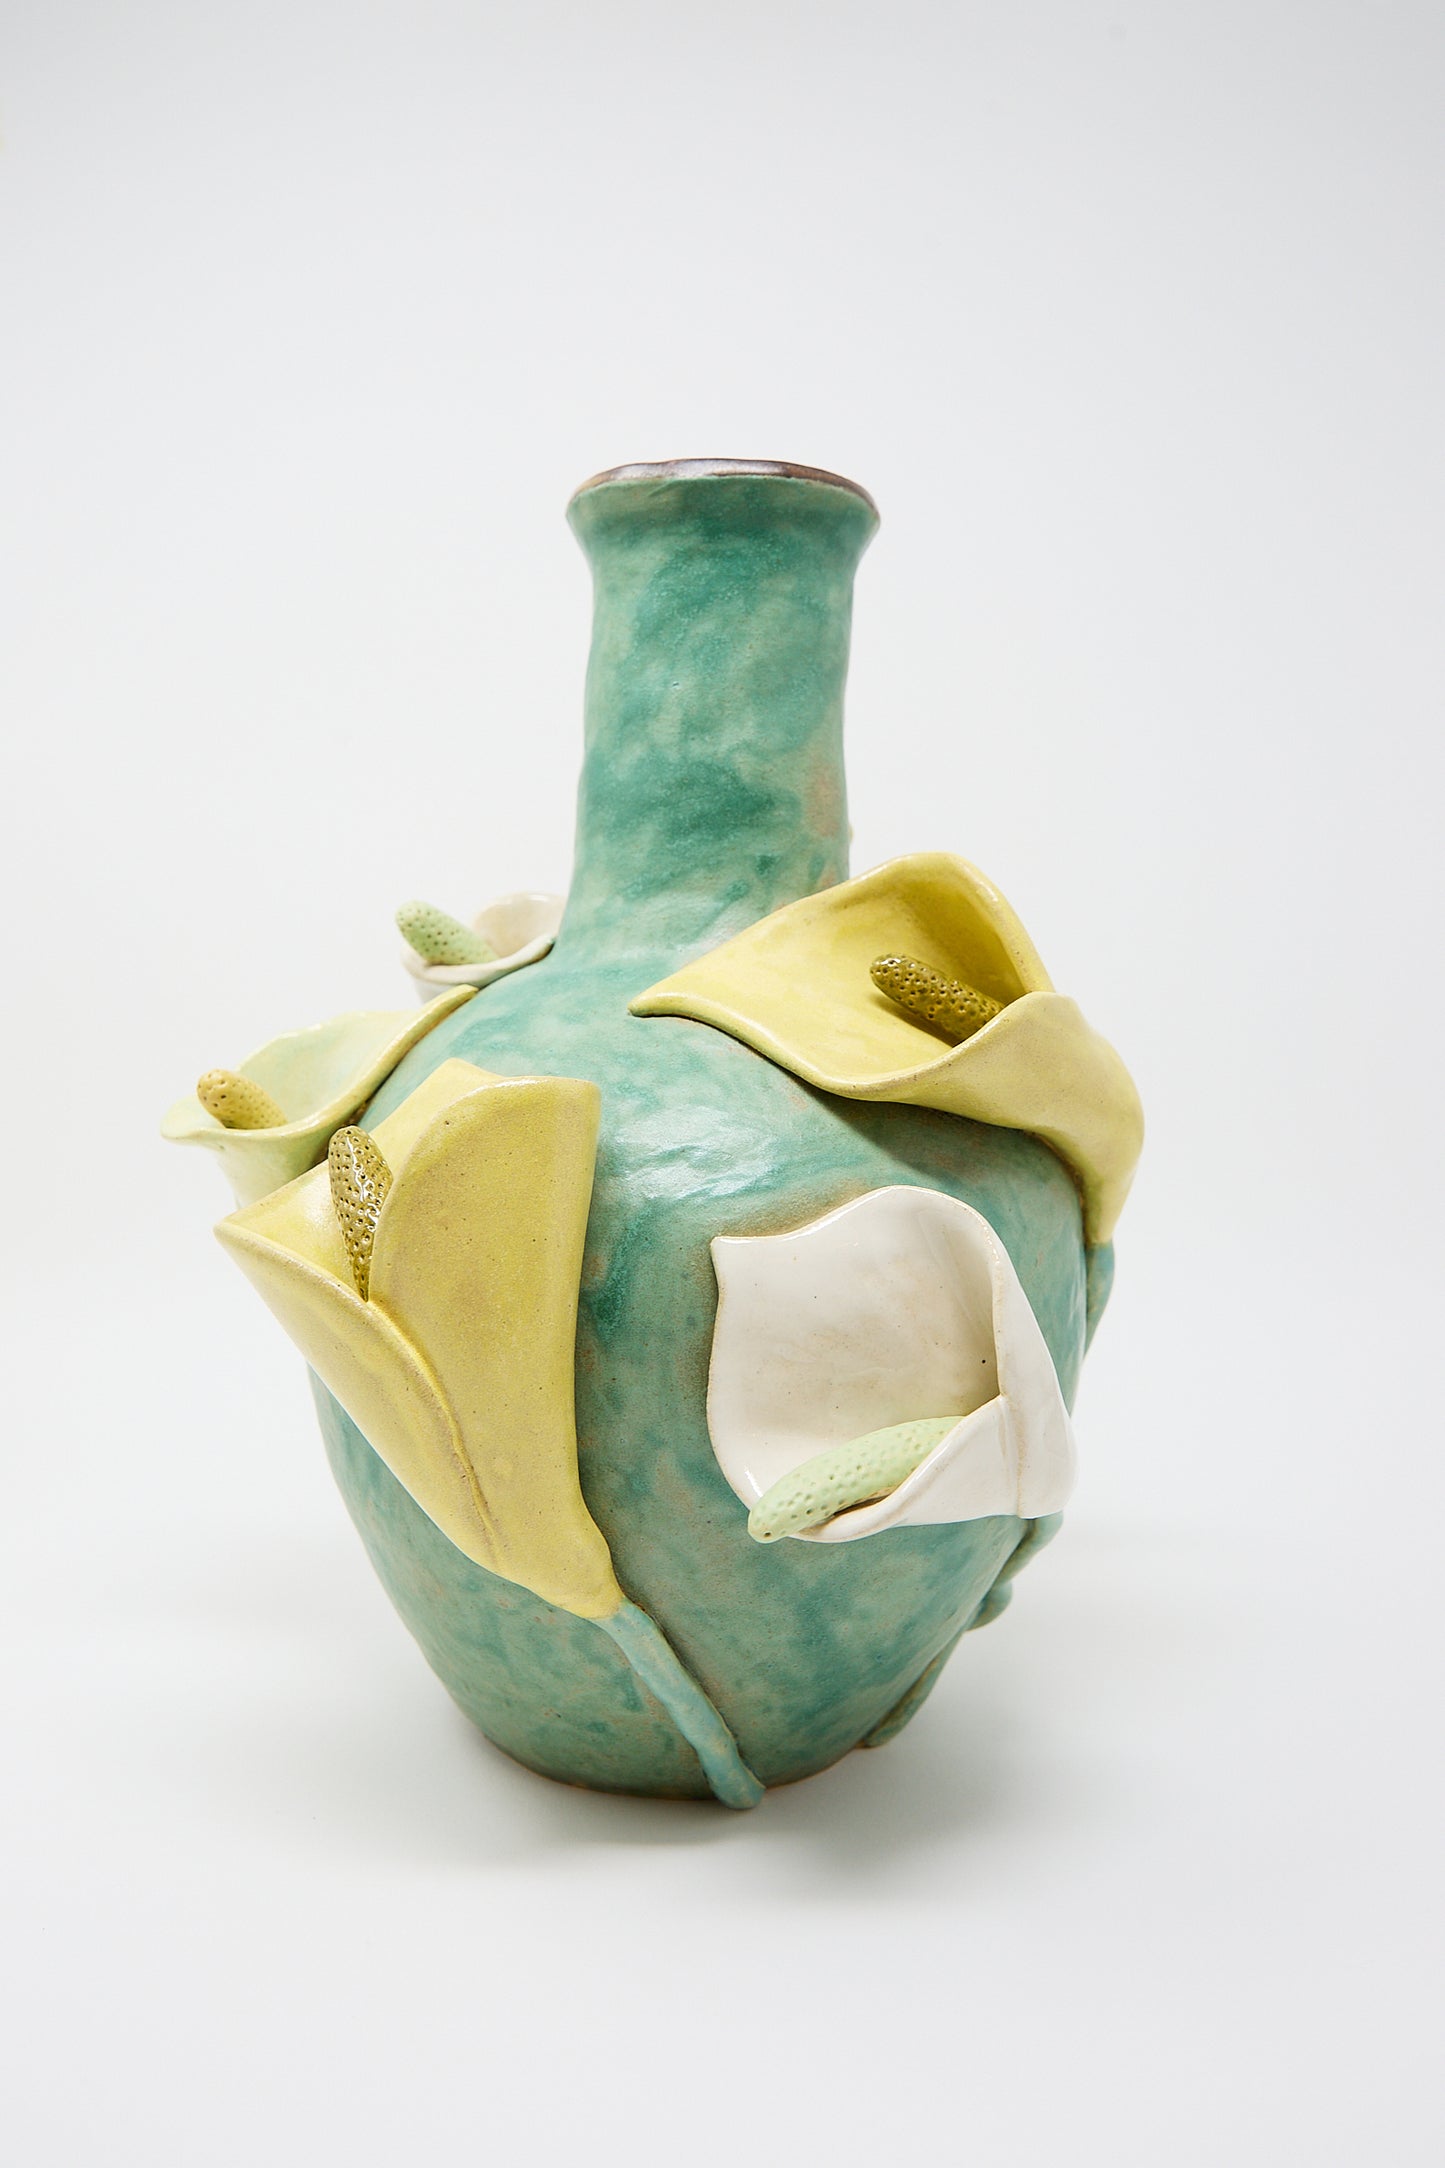 A glazed stoneware Calla Vase from Pearce Williams with a turquoise glaze, adorned with sculpted, yellow-white calla lilies and textured details, set against a white background.